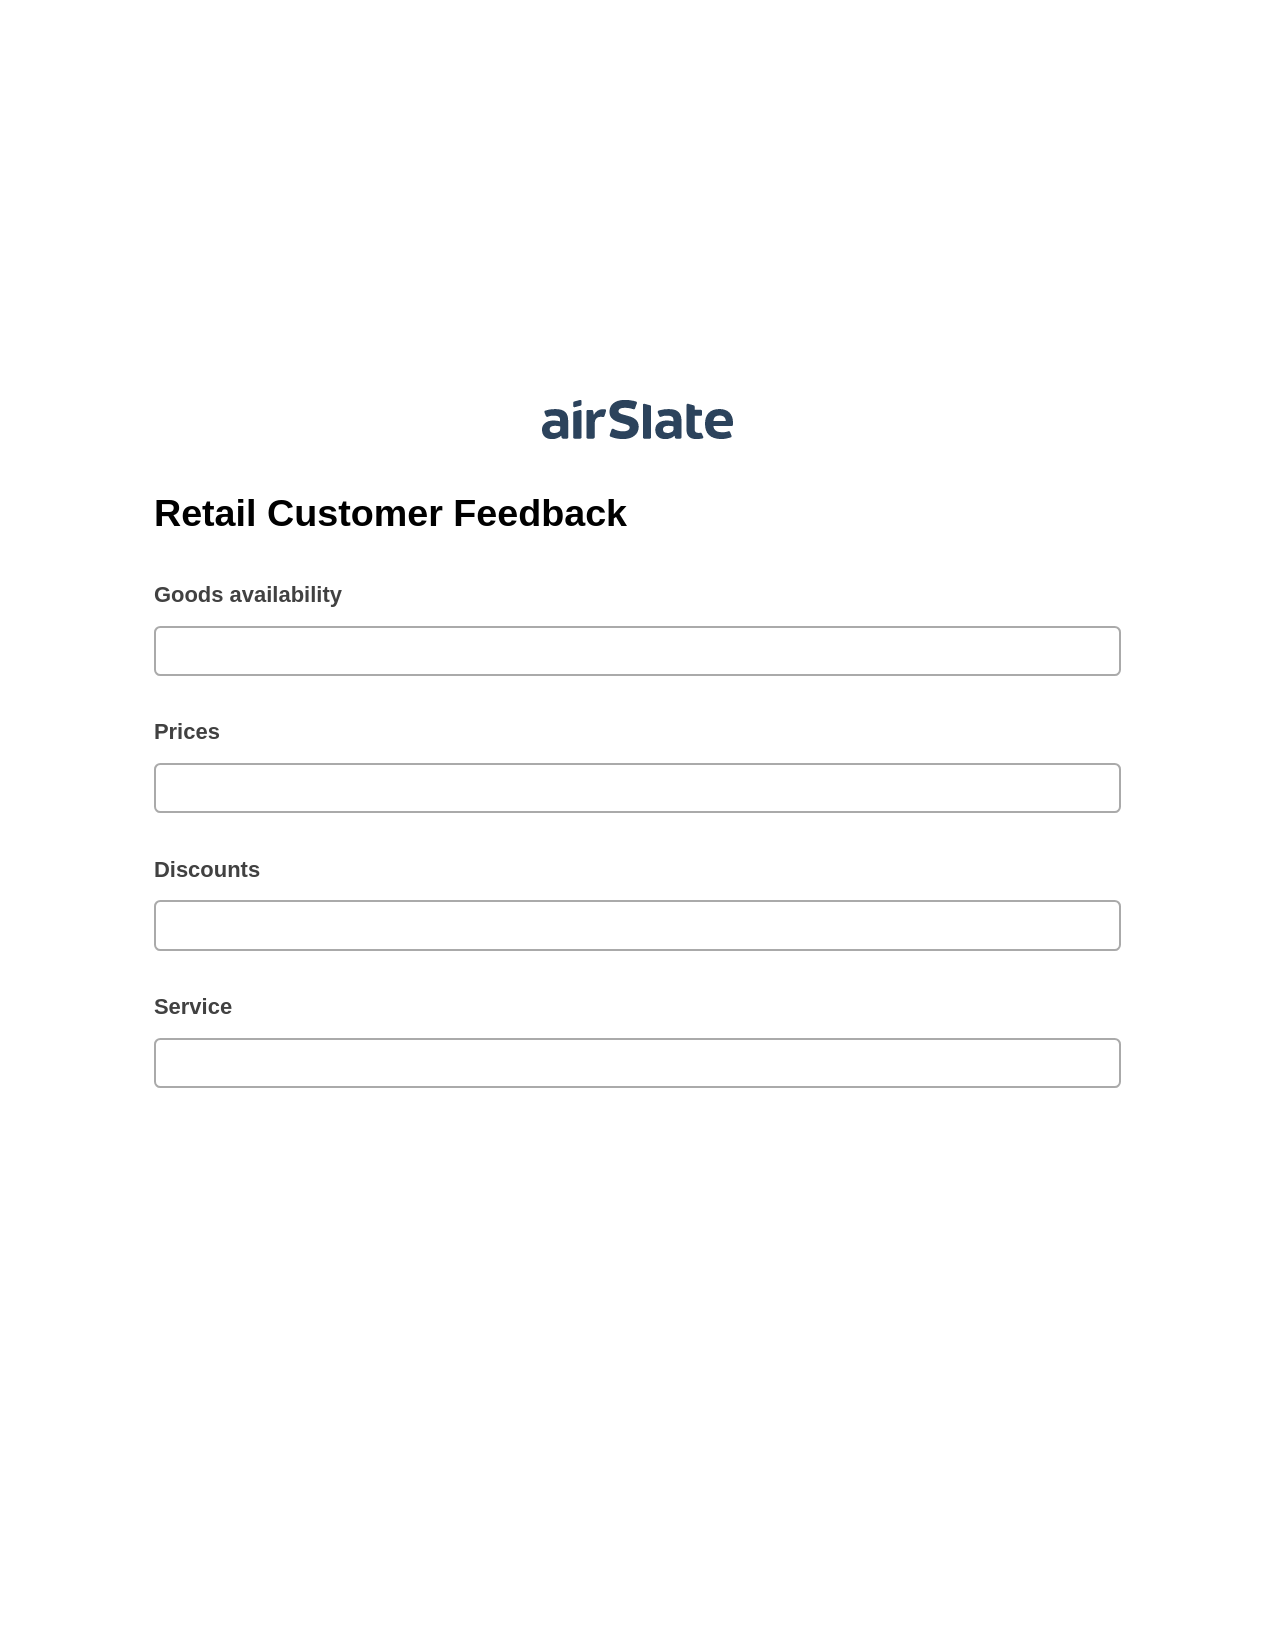 Multirole Retail Customer Feedback Pre-fill Slate from MS Dynamics 365 Records Bot, Update Salesforce Record Bot, Export to NetSuite Record Bot